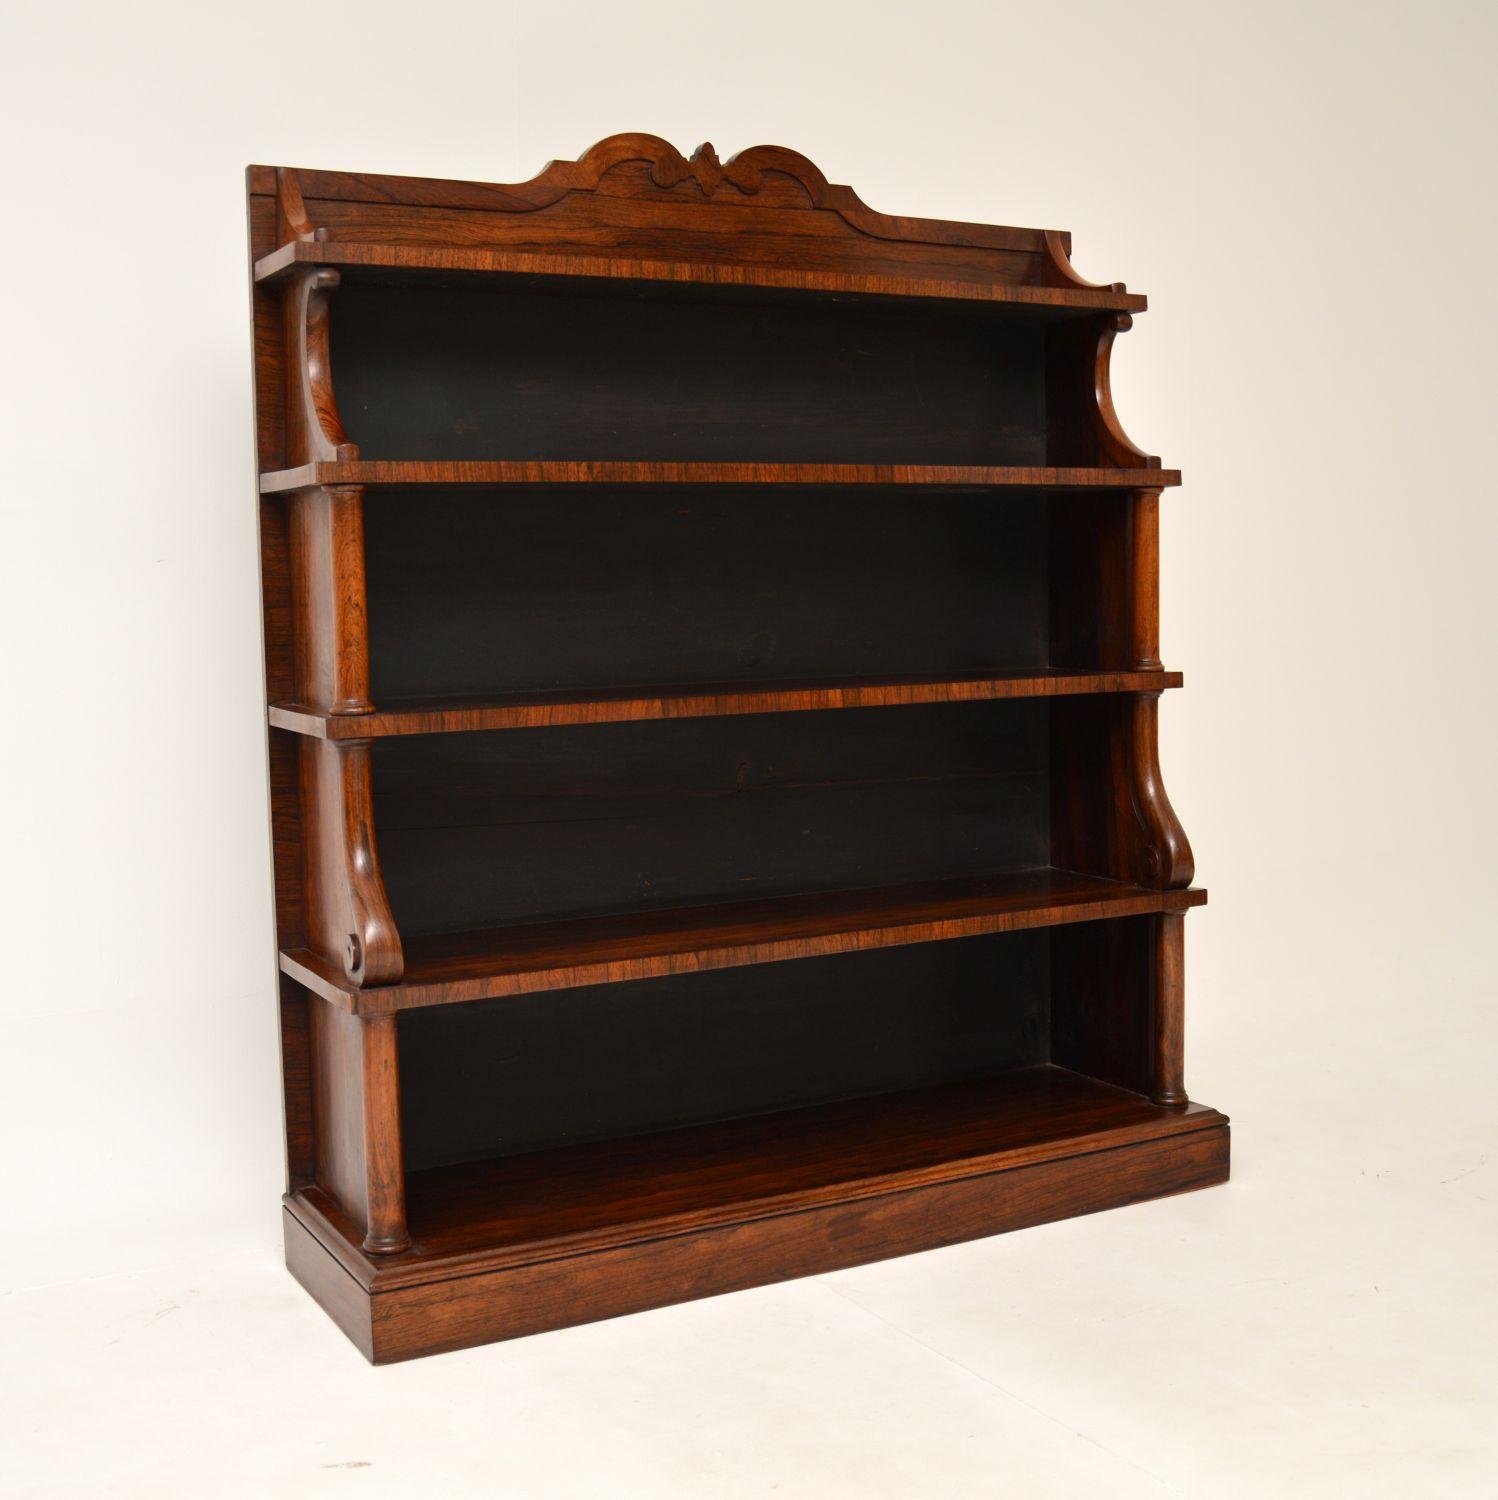 A beautifully made original antique William IV period open bookcase. This was made in England, it dates from around 1830-1840.

It is of superb quality and has a gorgeous cascading design. It is a very useful size, large enough to hold plenty of